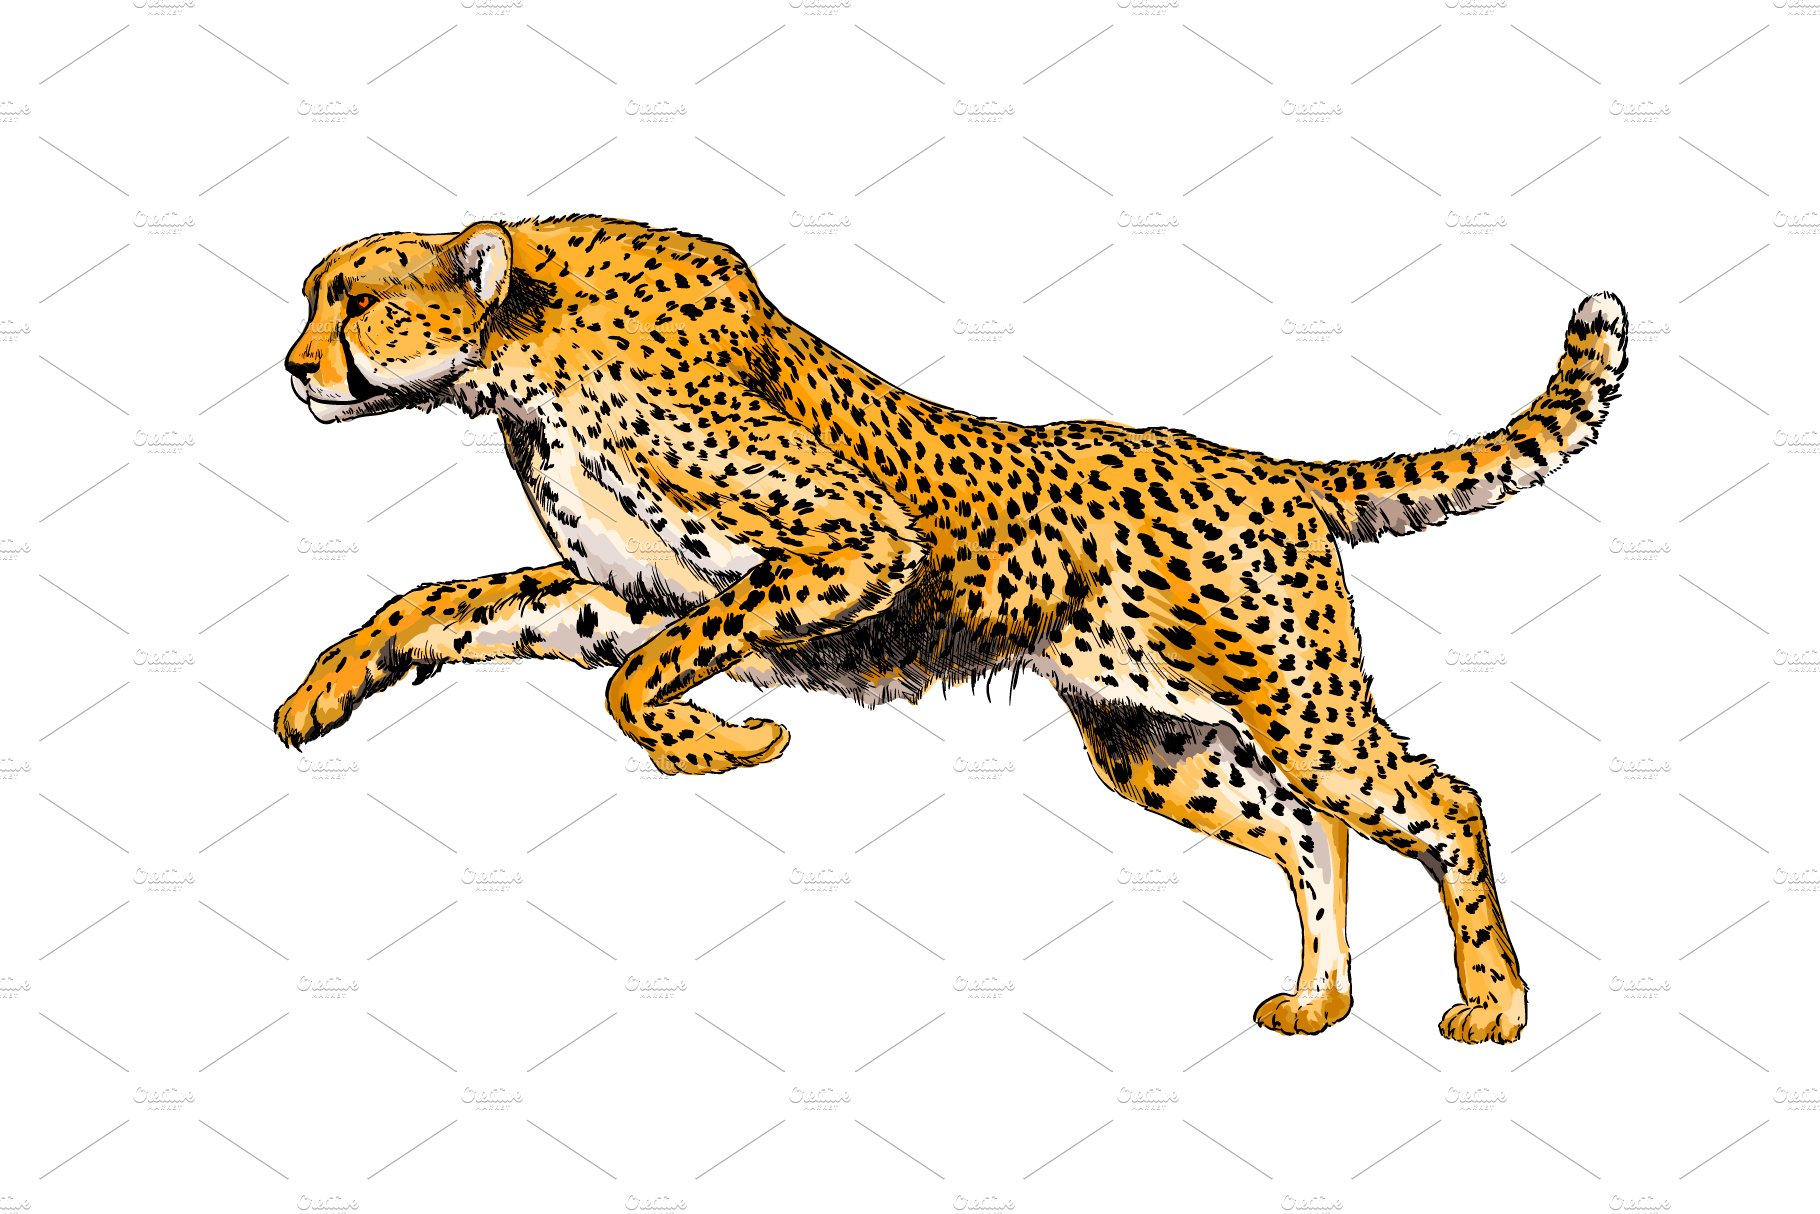 Cheetah from a splash of watercolor cover image.